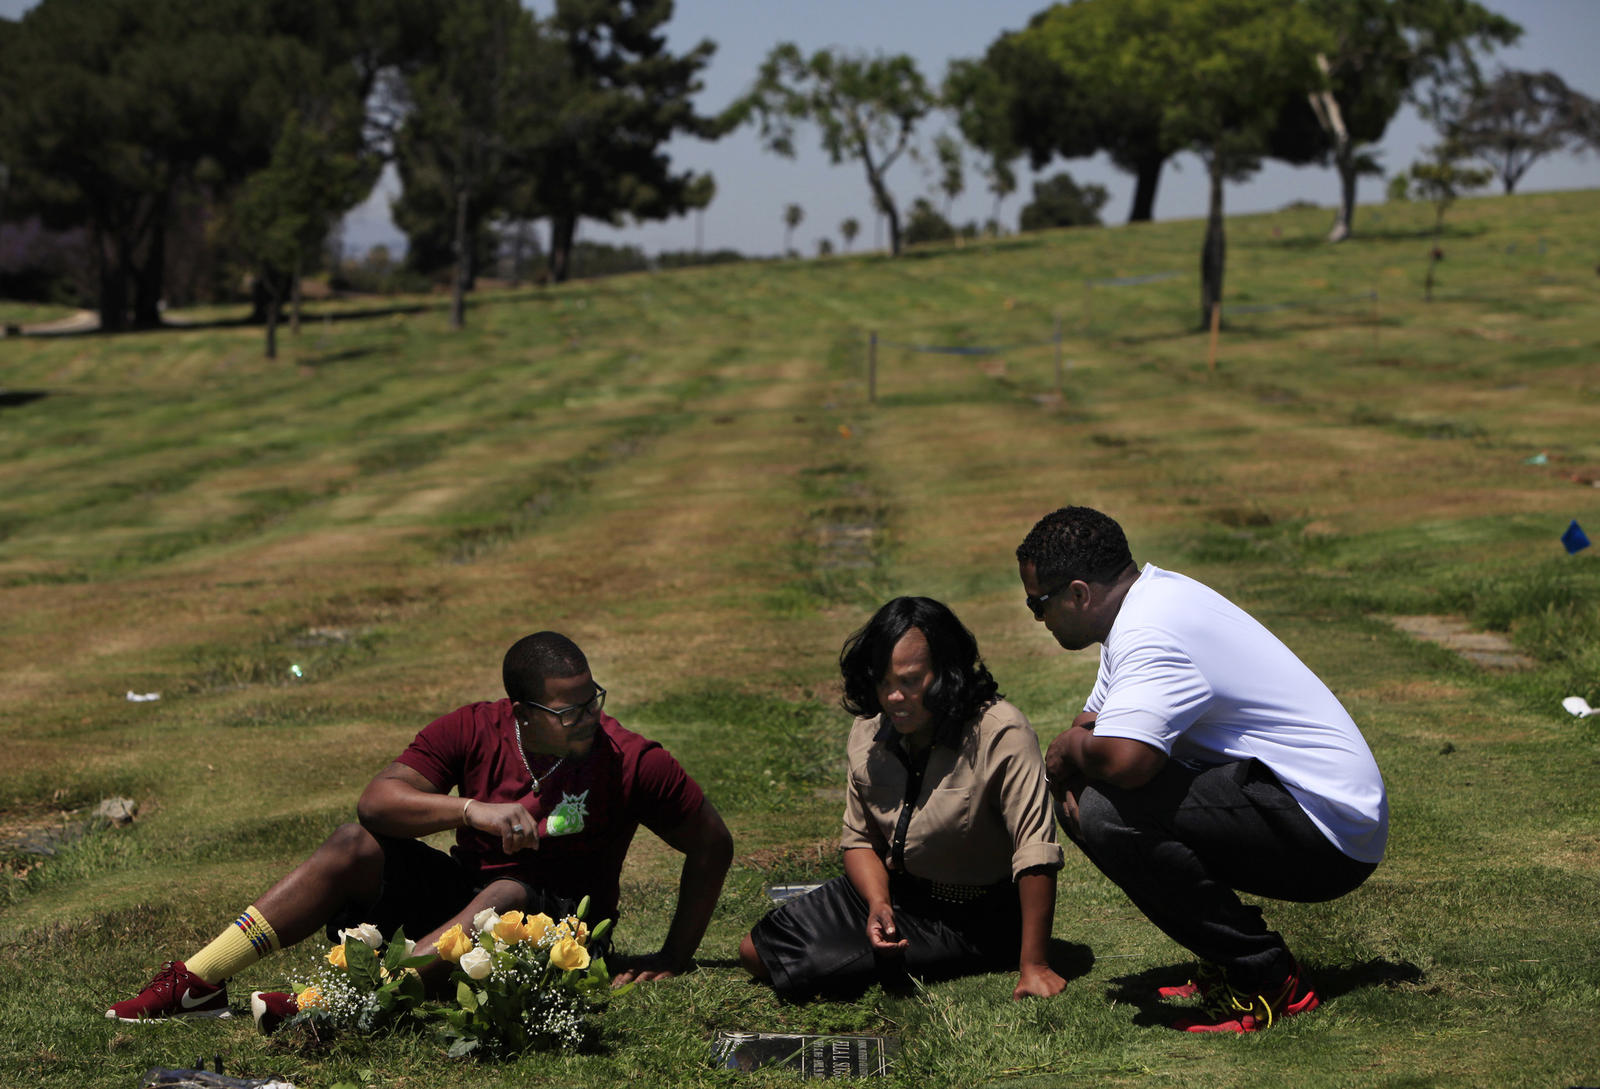 Atwan Williams, LaQuita Suggs and Solomon Ricks visit LaQuita mother's grave at the Inglewood Park Cemetery on the seventh anniversary of her death. LaQuita's mother Ella Suggs was stabbed multiple times and died April 29, 2007.